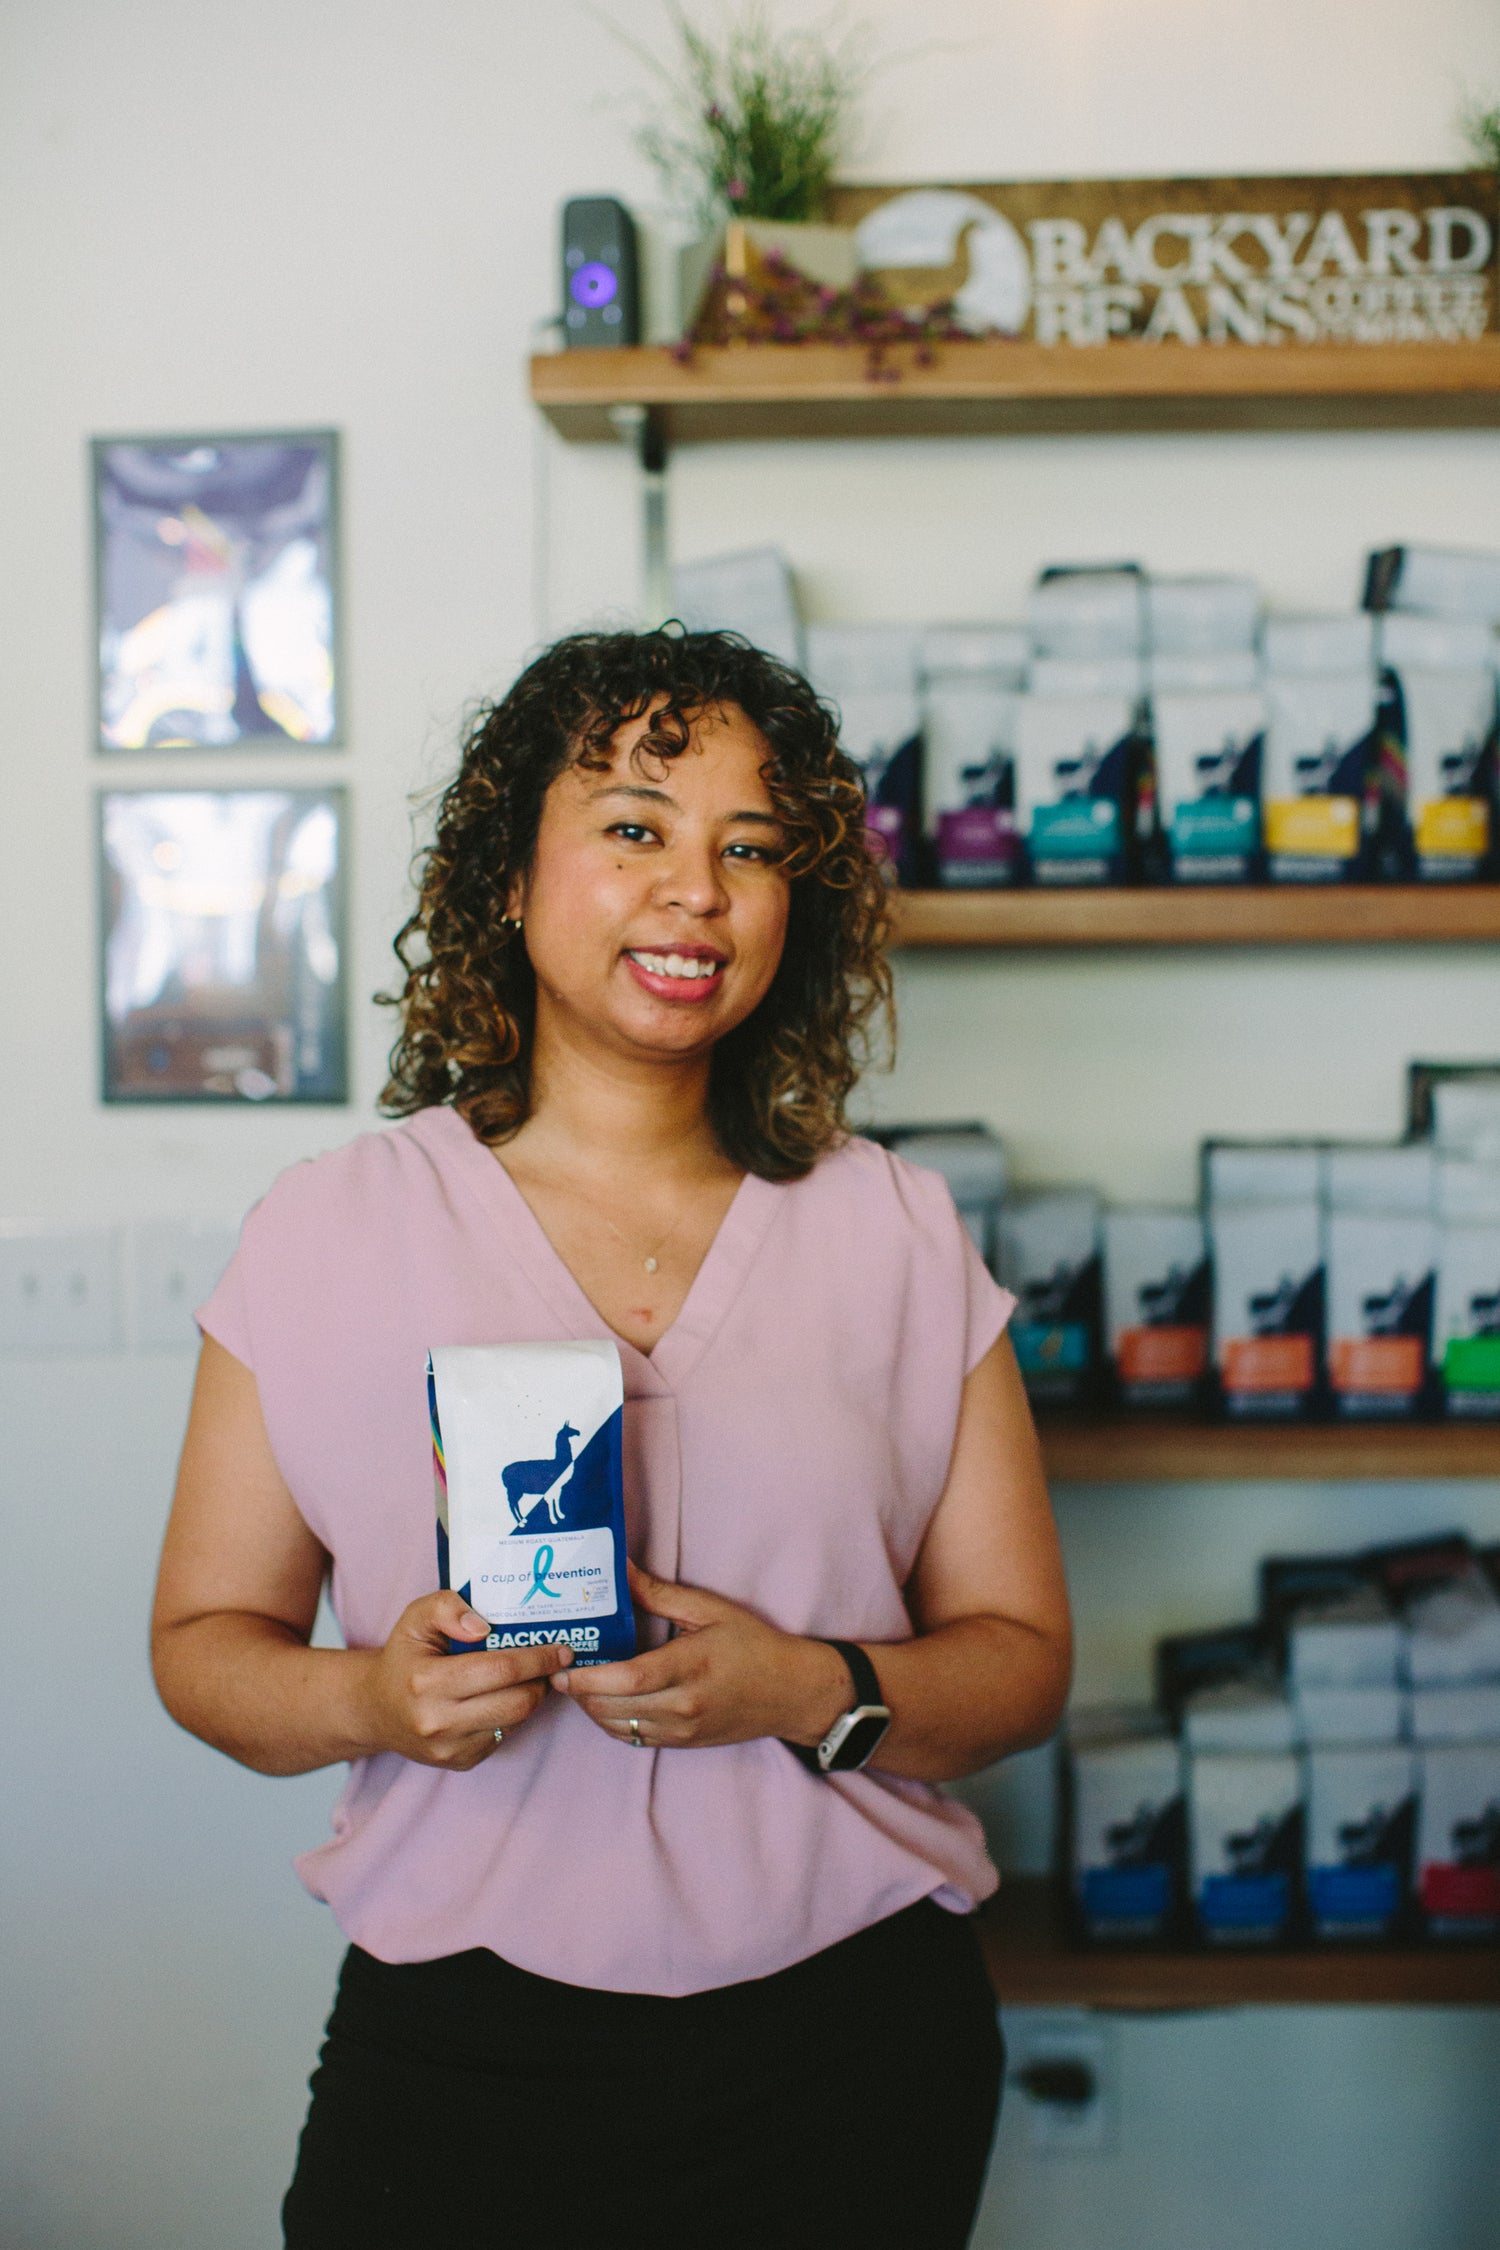 Image of a woman part of non-profit organization holding a coffee bag for a fundraiser.